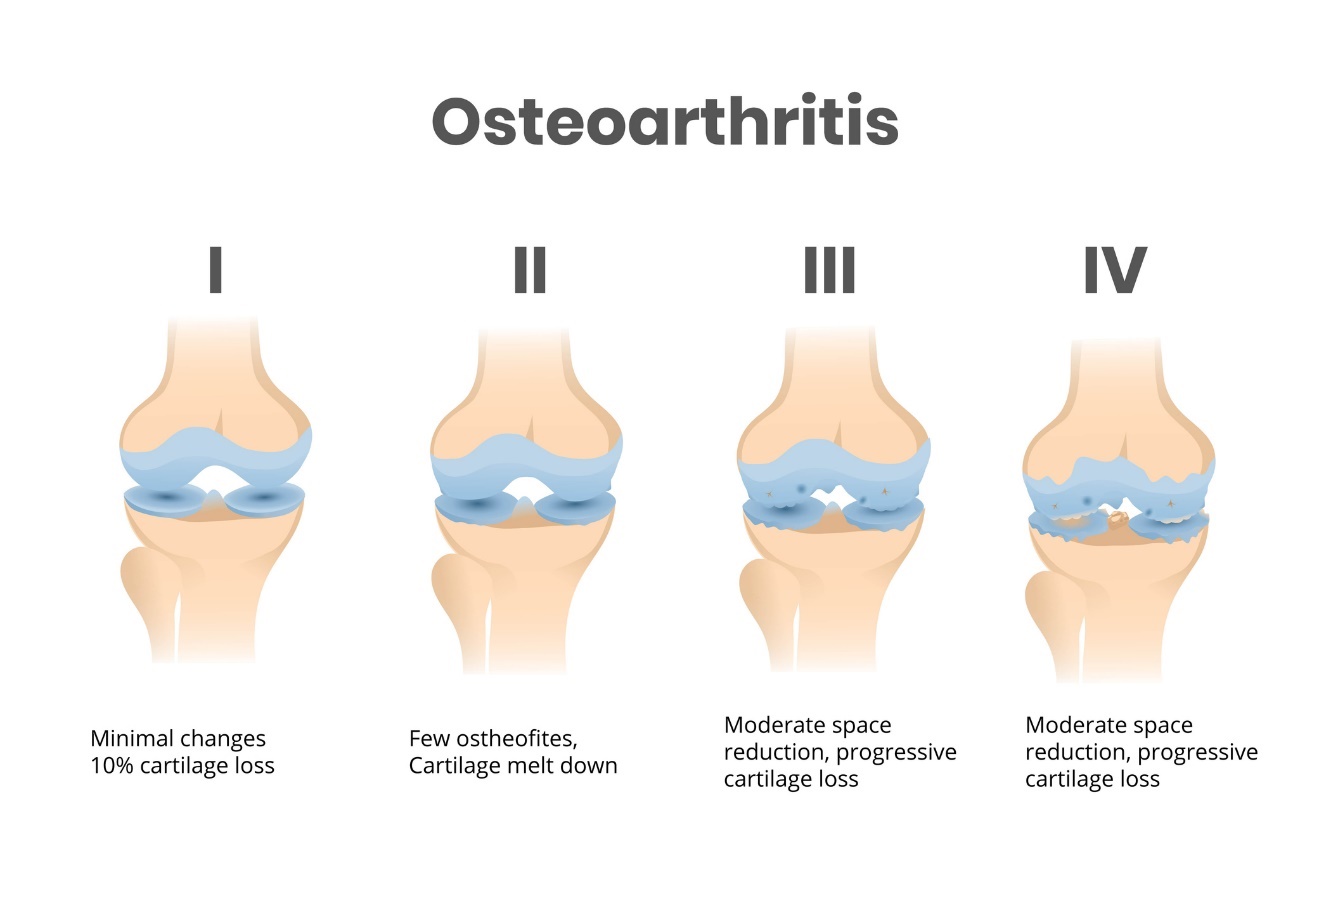 4 stages of arthrosis